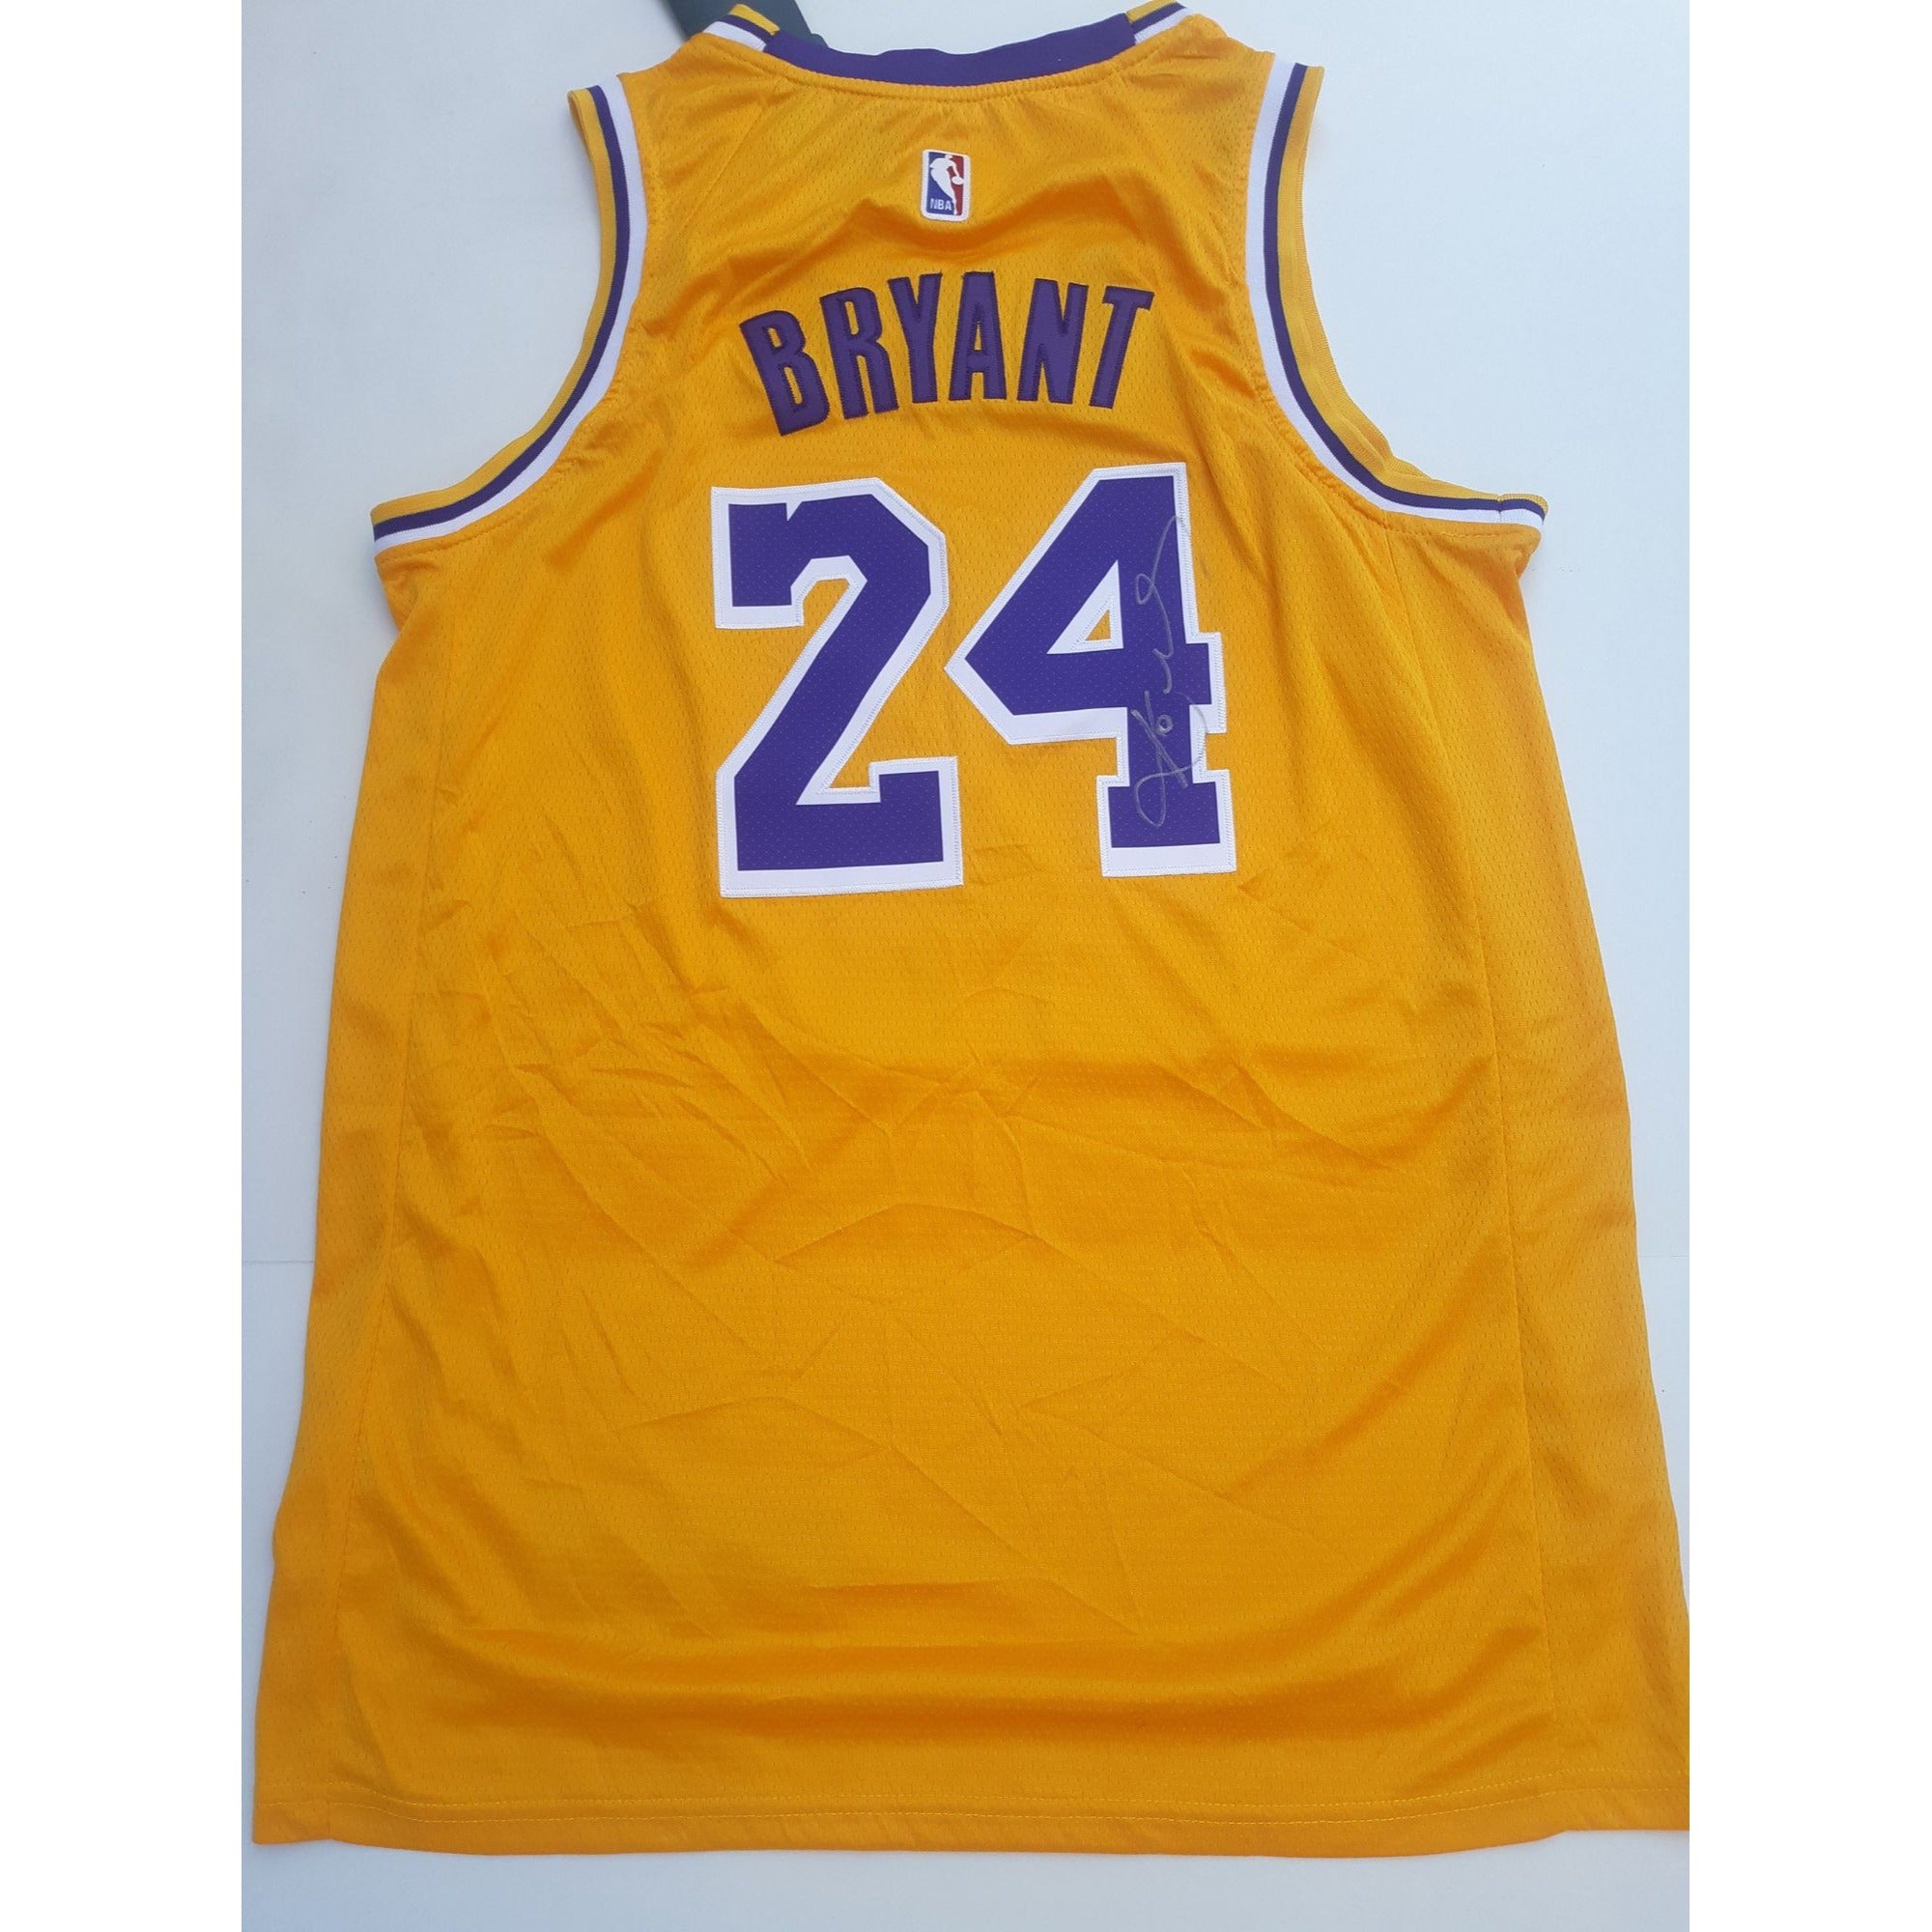 Kobe Bryant The Black Mamba Los Angeles Lakers Authentic size XL jersey signed with proof